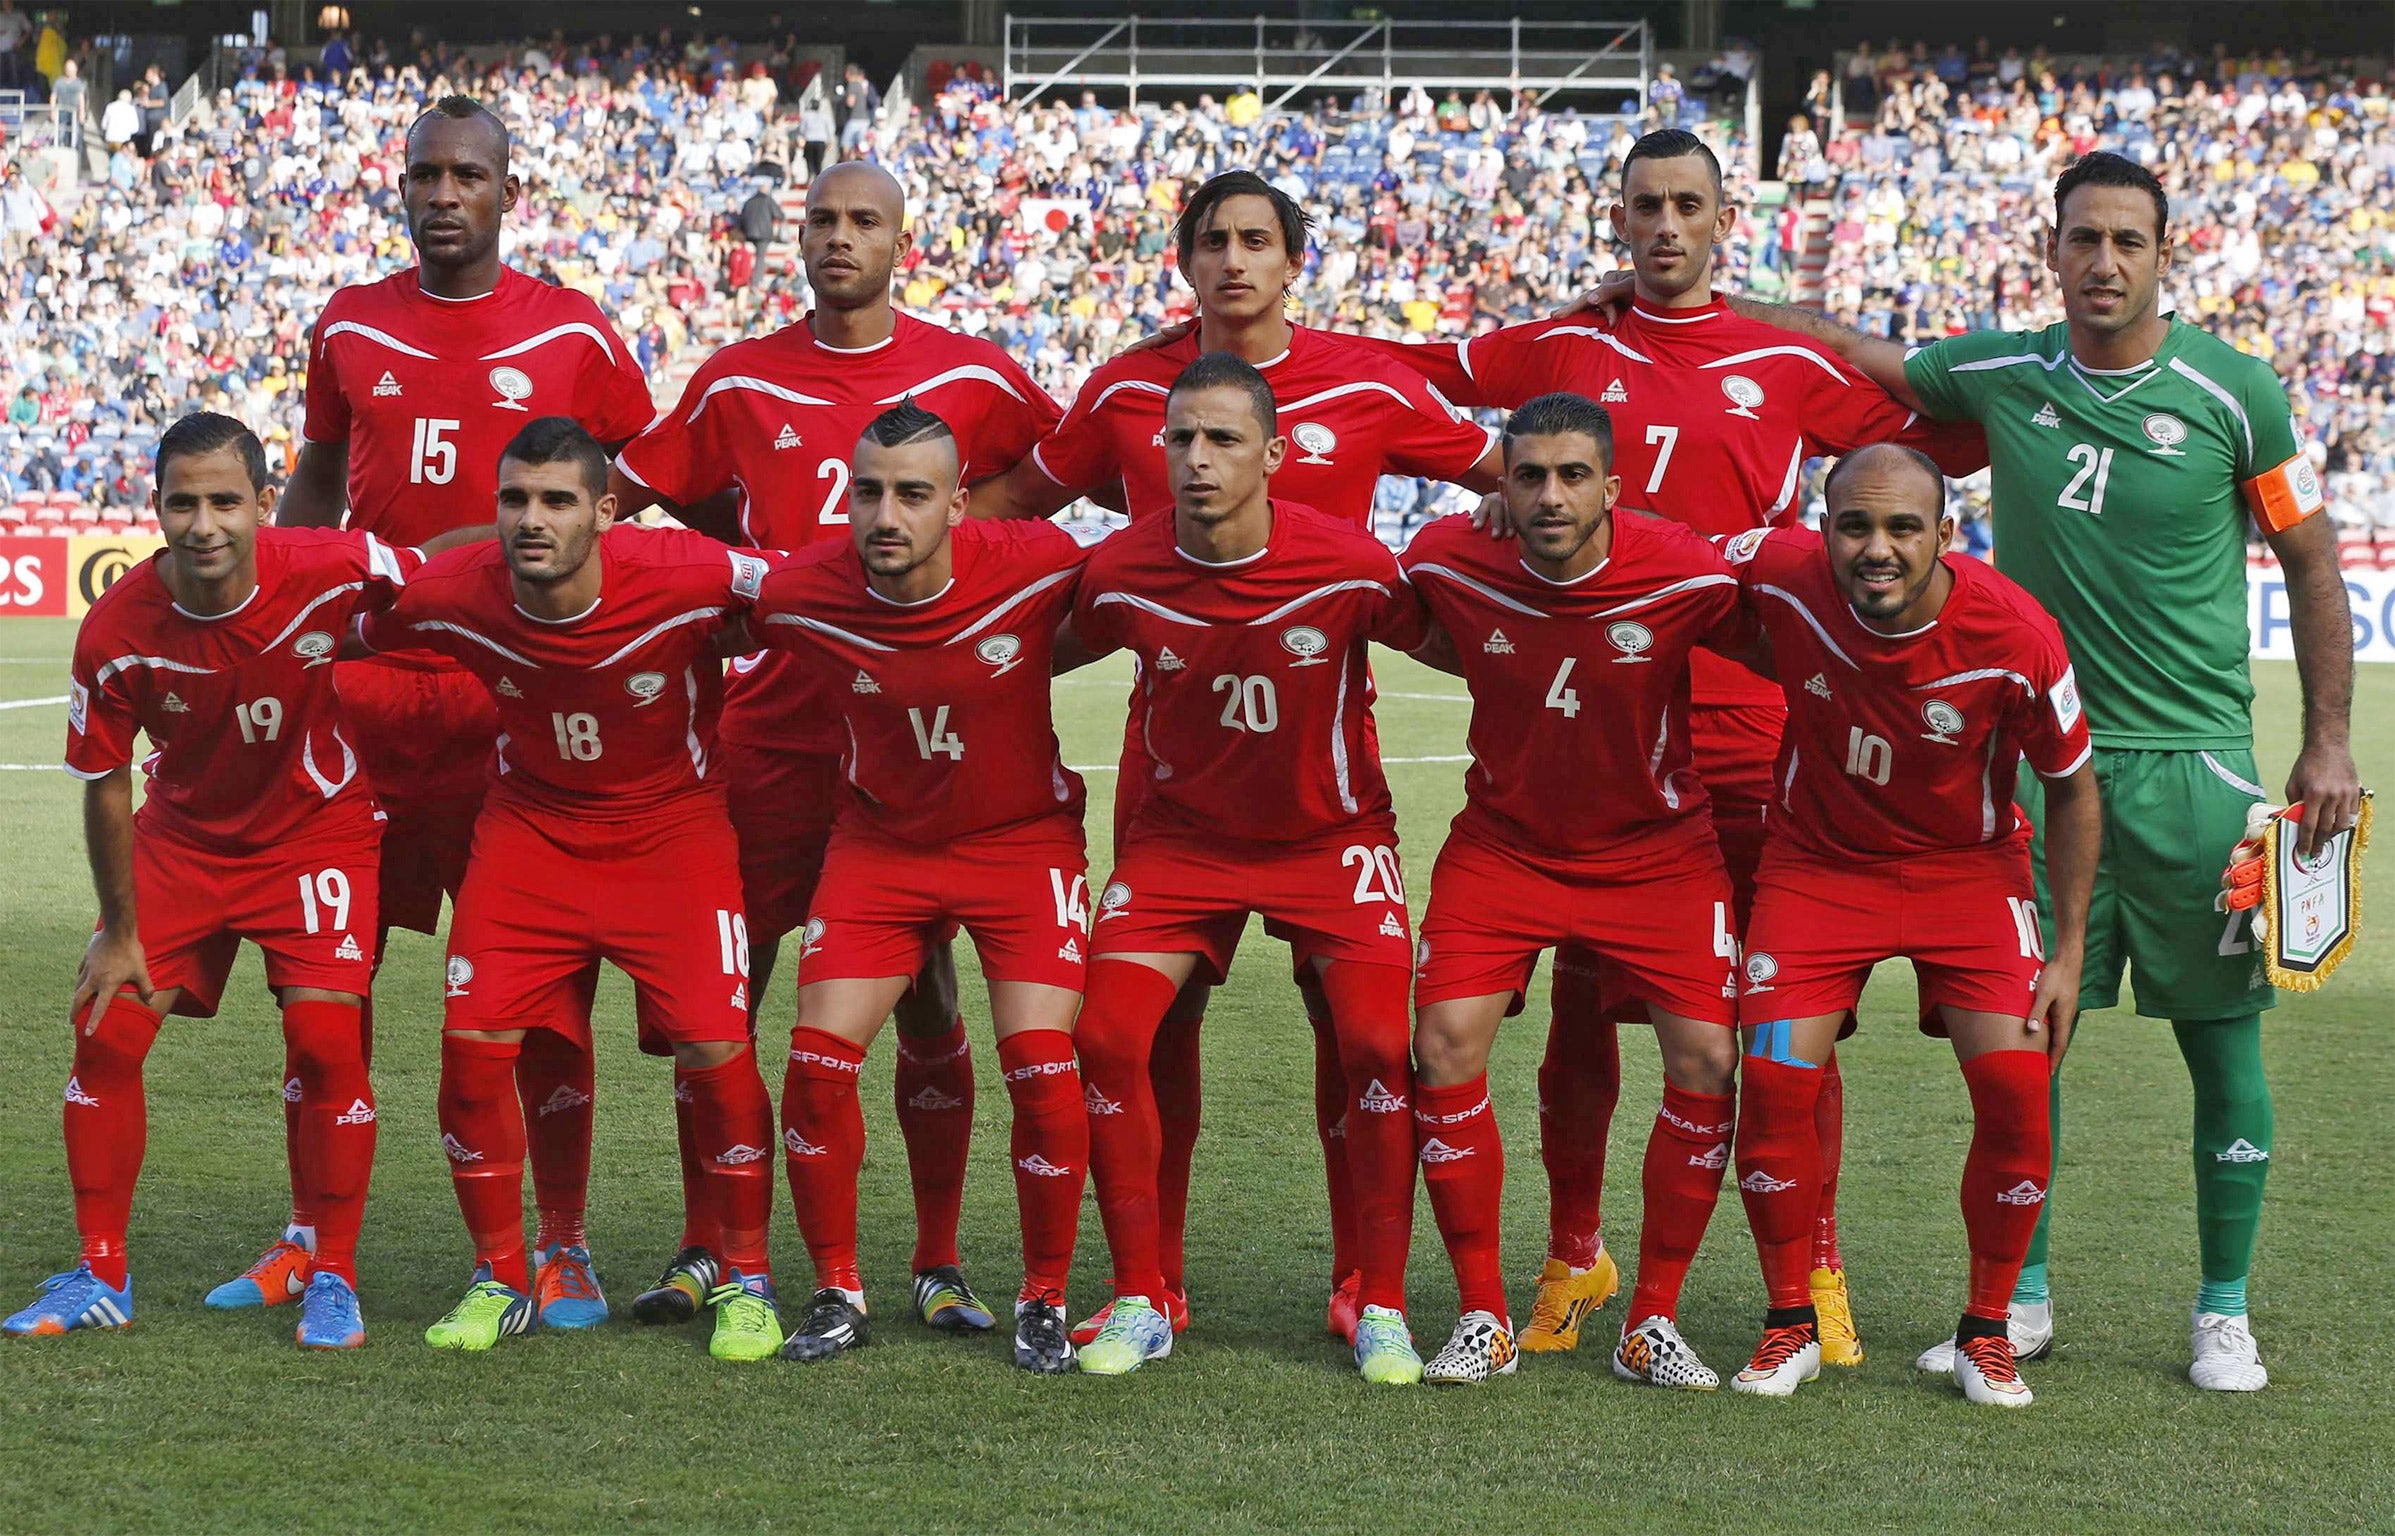 The Palestine team line up before their opening Asian Cup group match against Japan in Australia this week